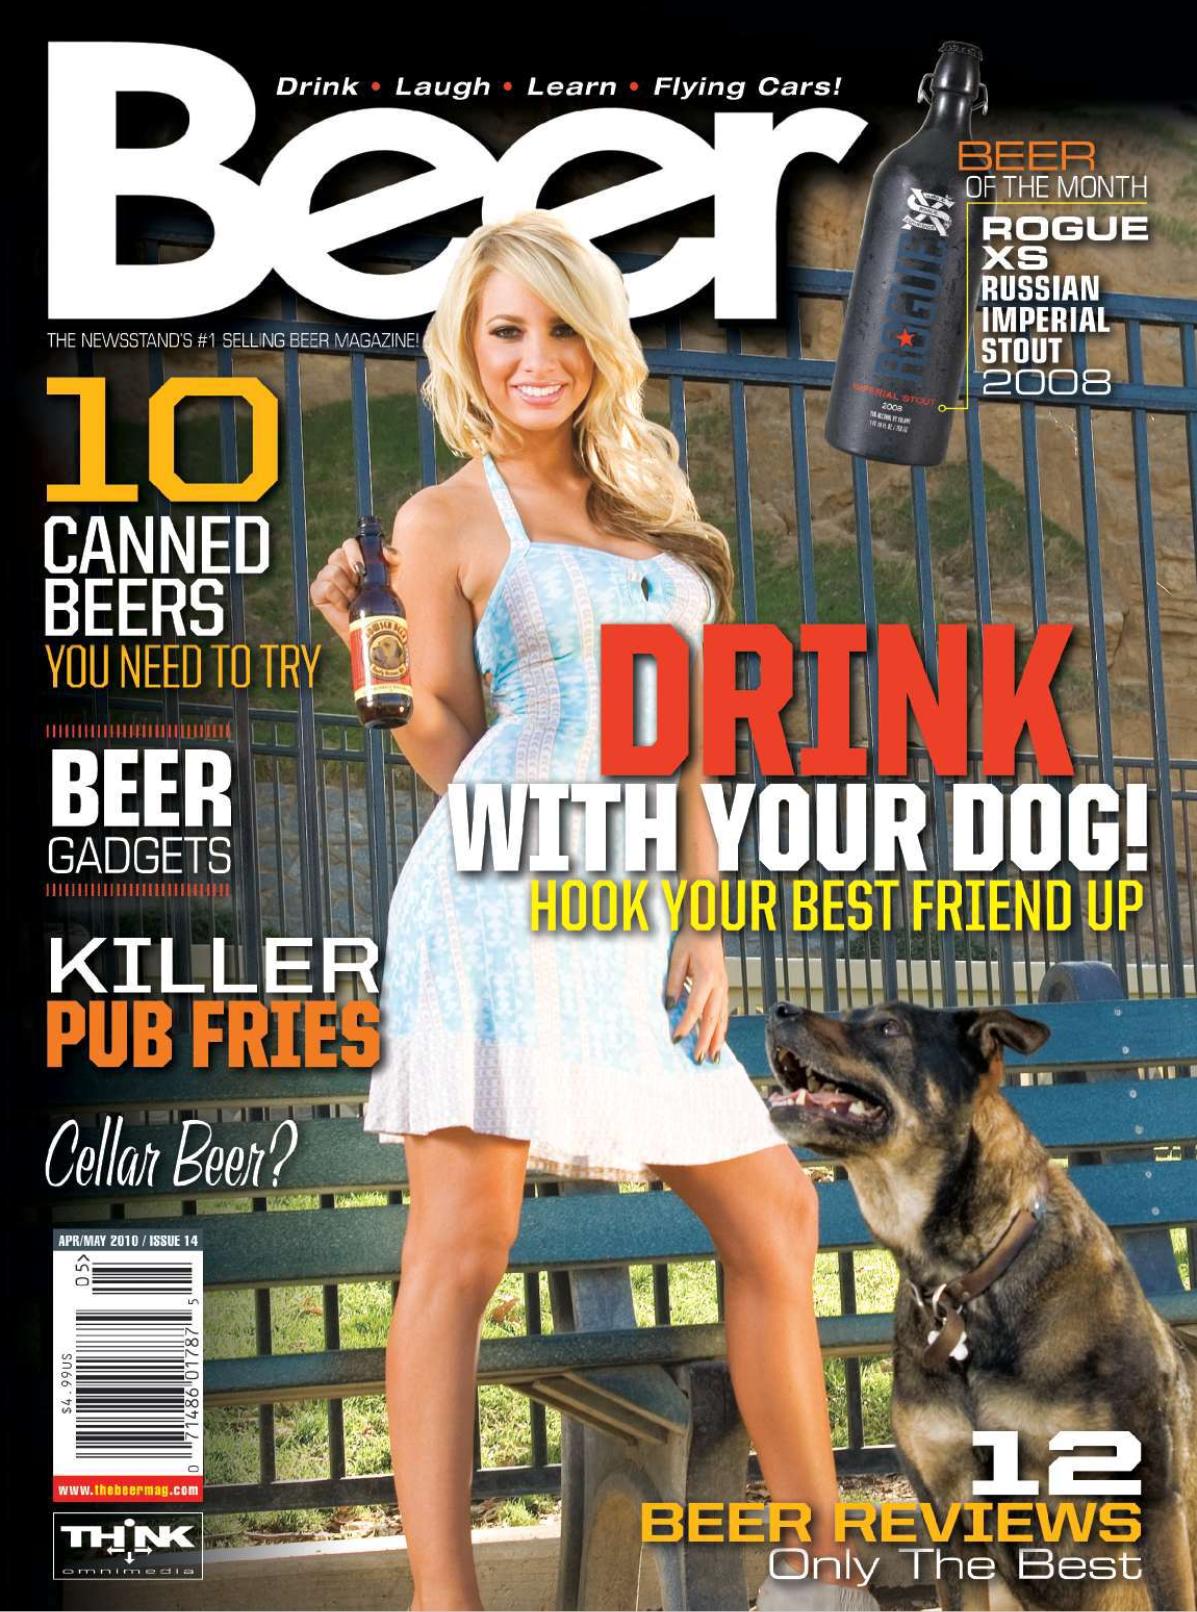 Beer Apr 2010 magazine reviews